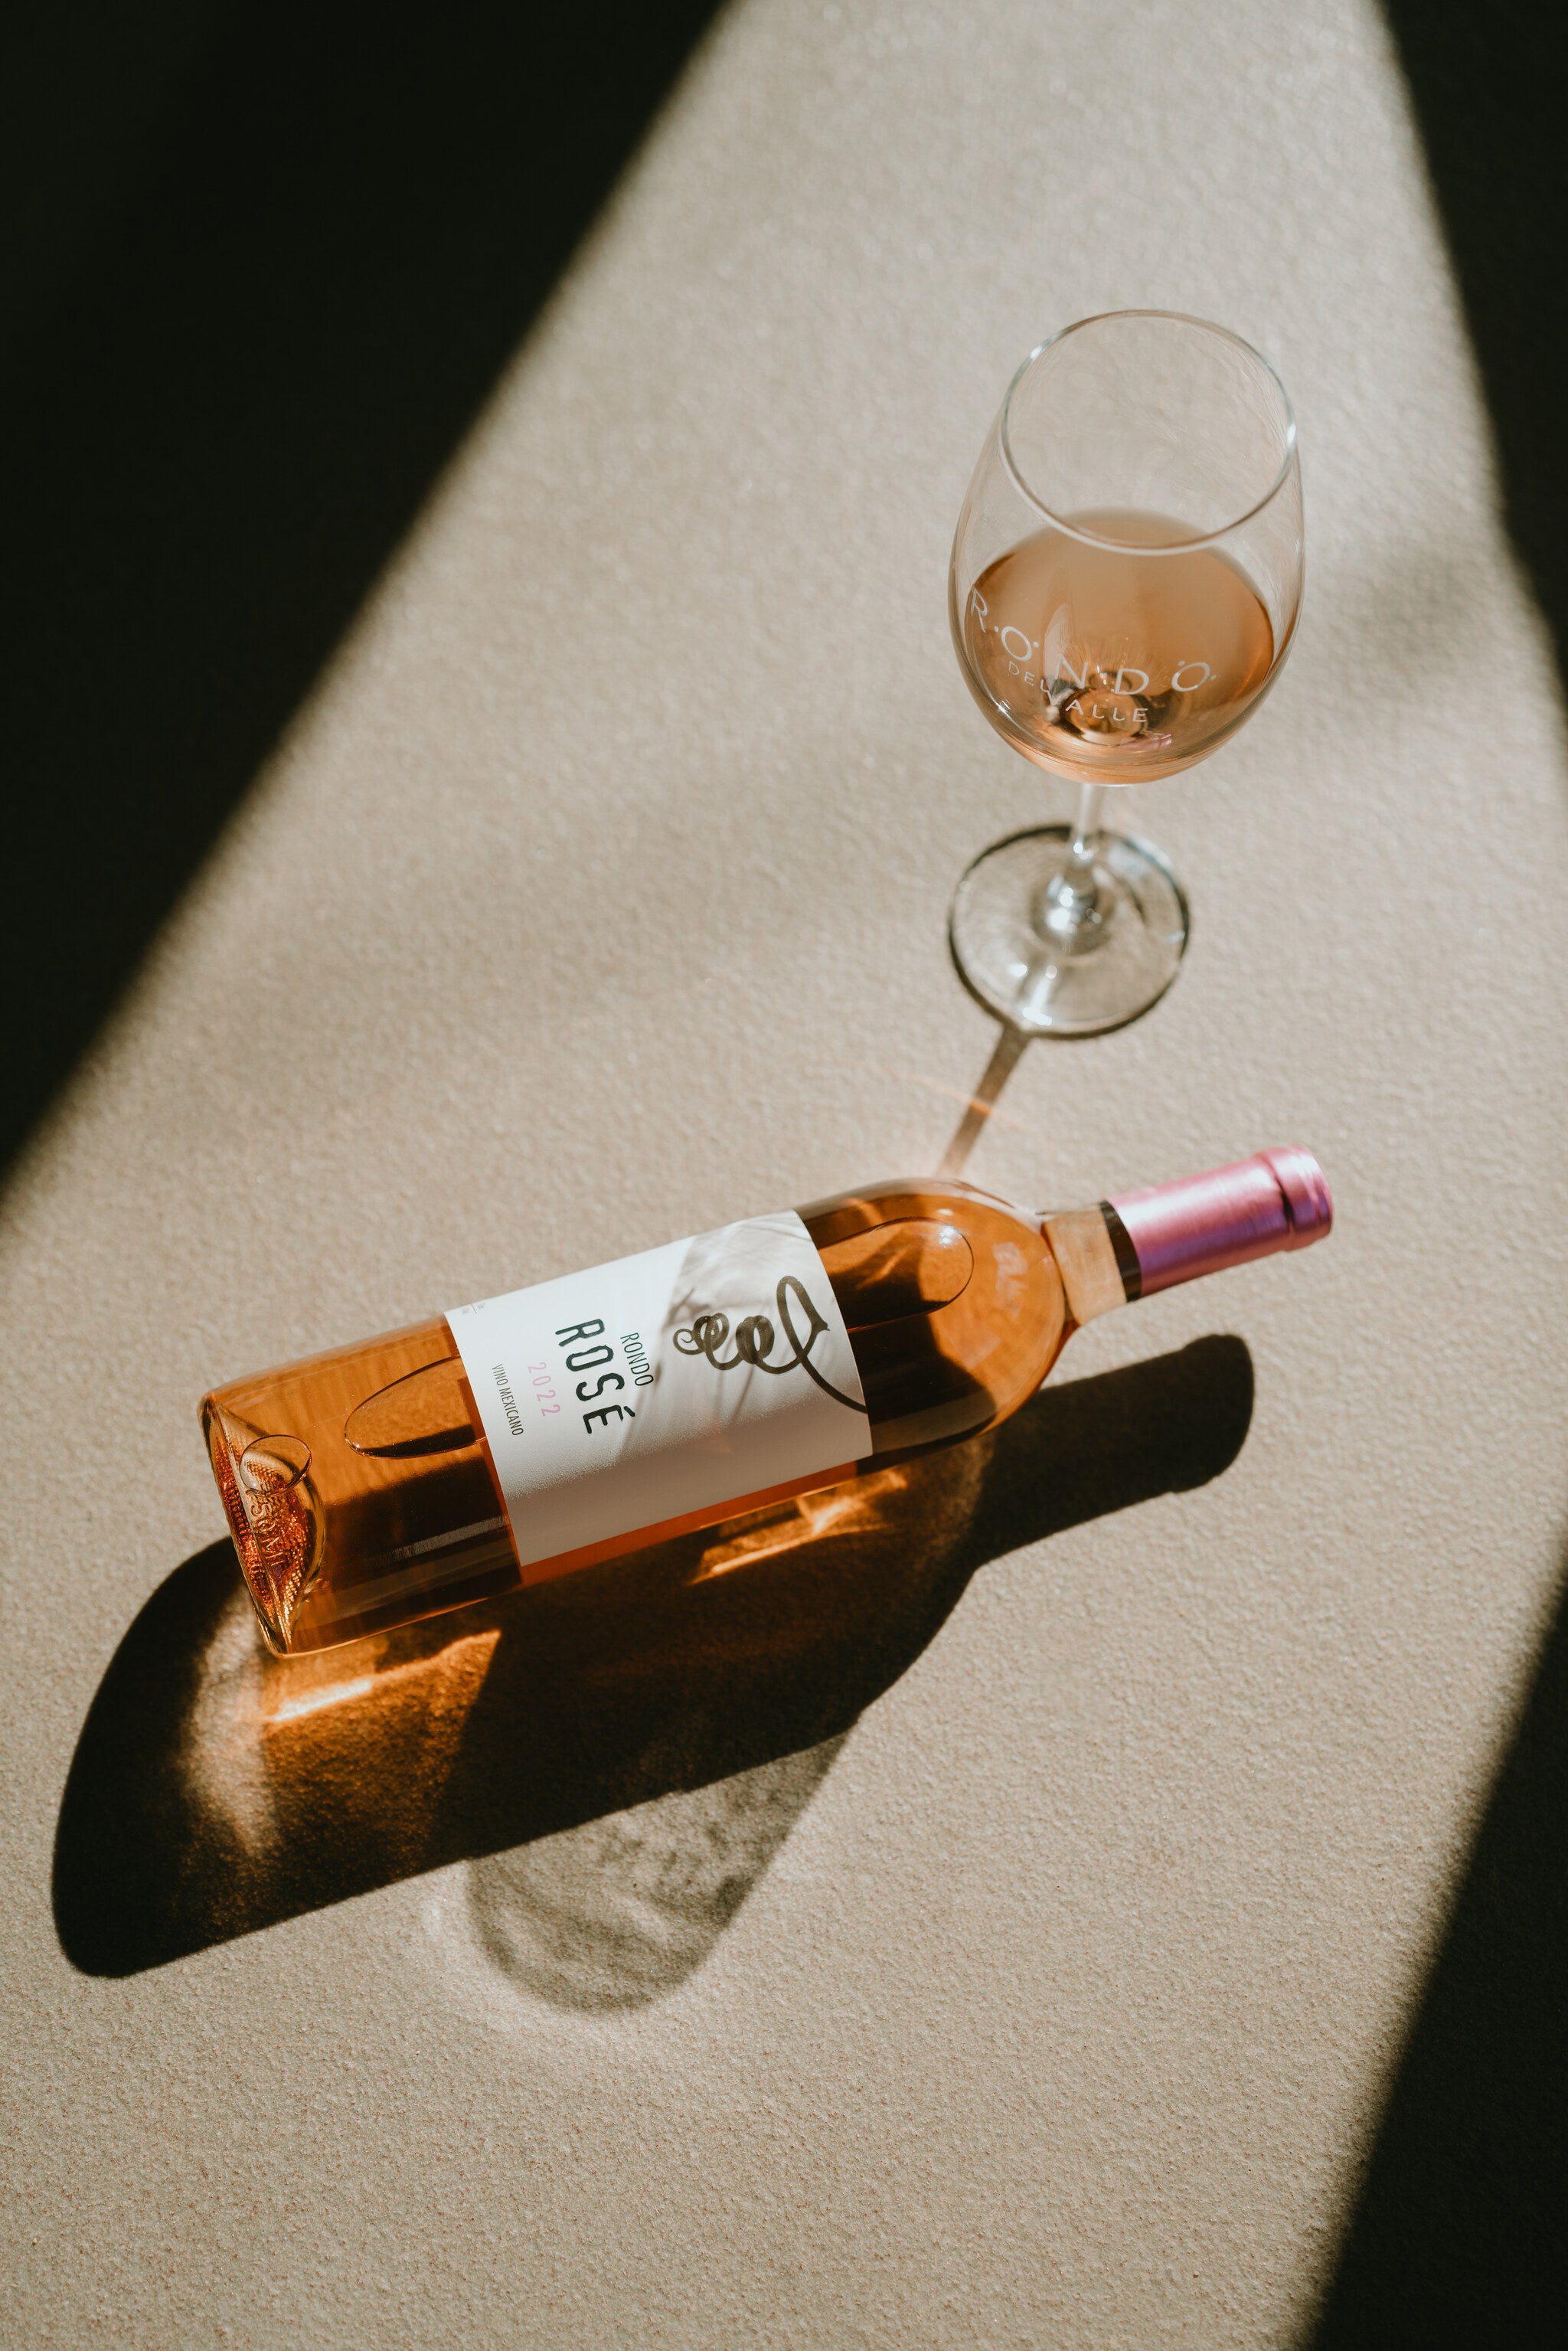 The experience of rosé wine production